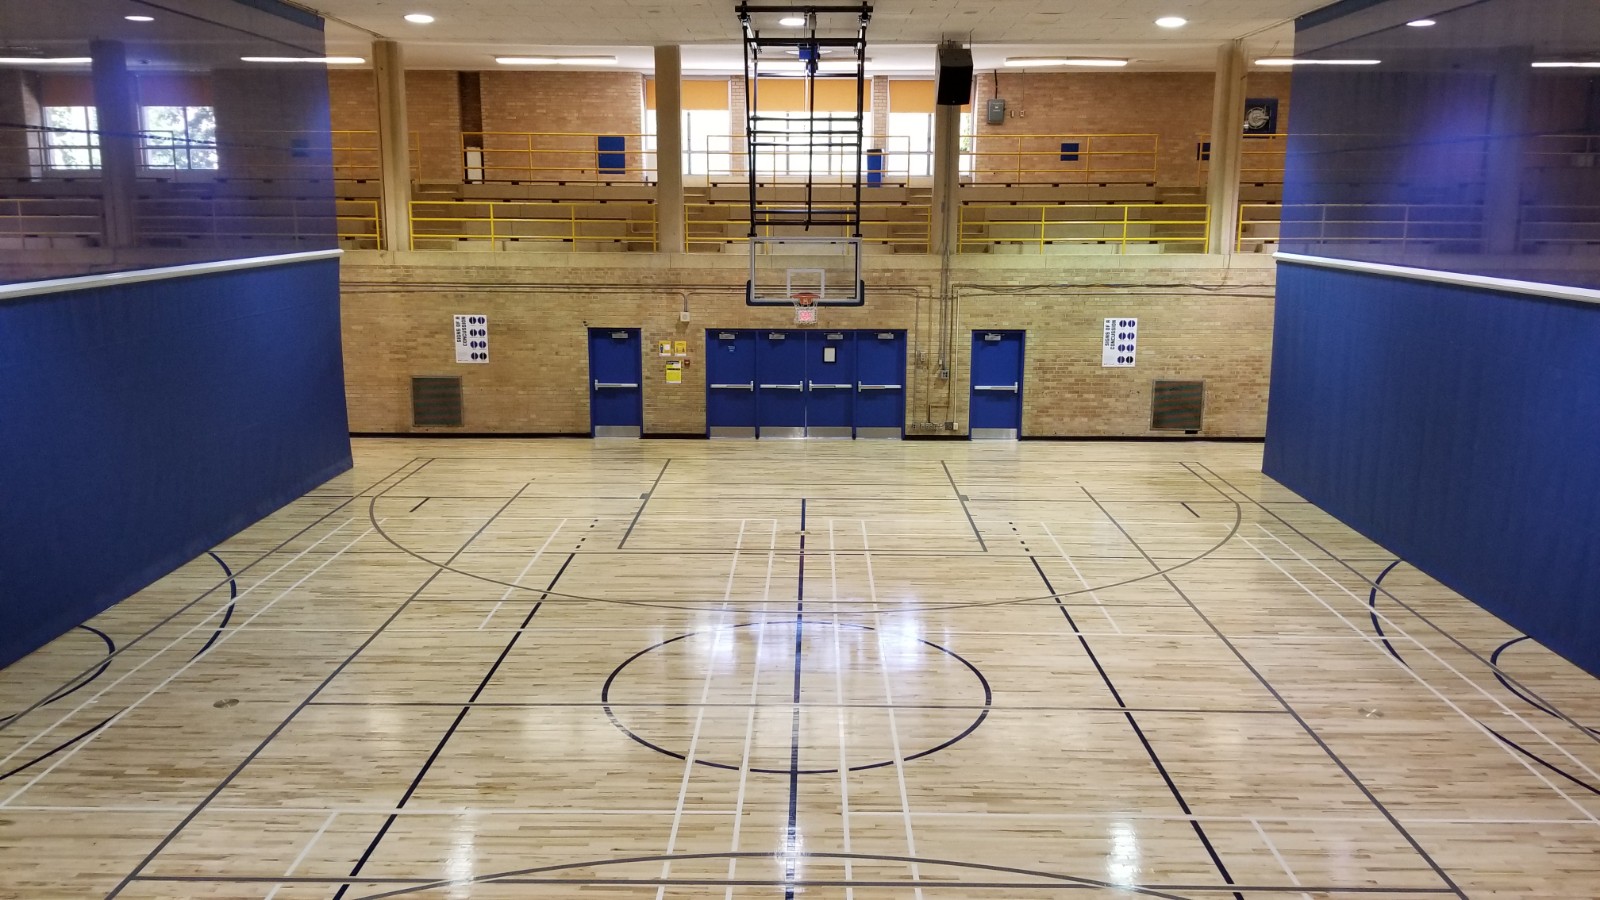 View of Kerr Hall Upper Gym, Centre Court with Divider Curtains